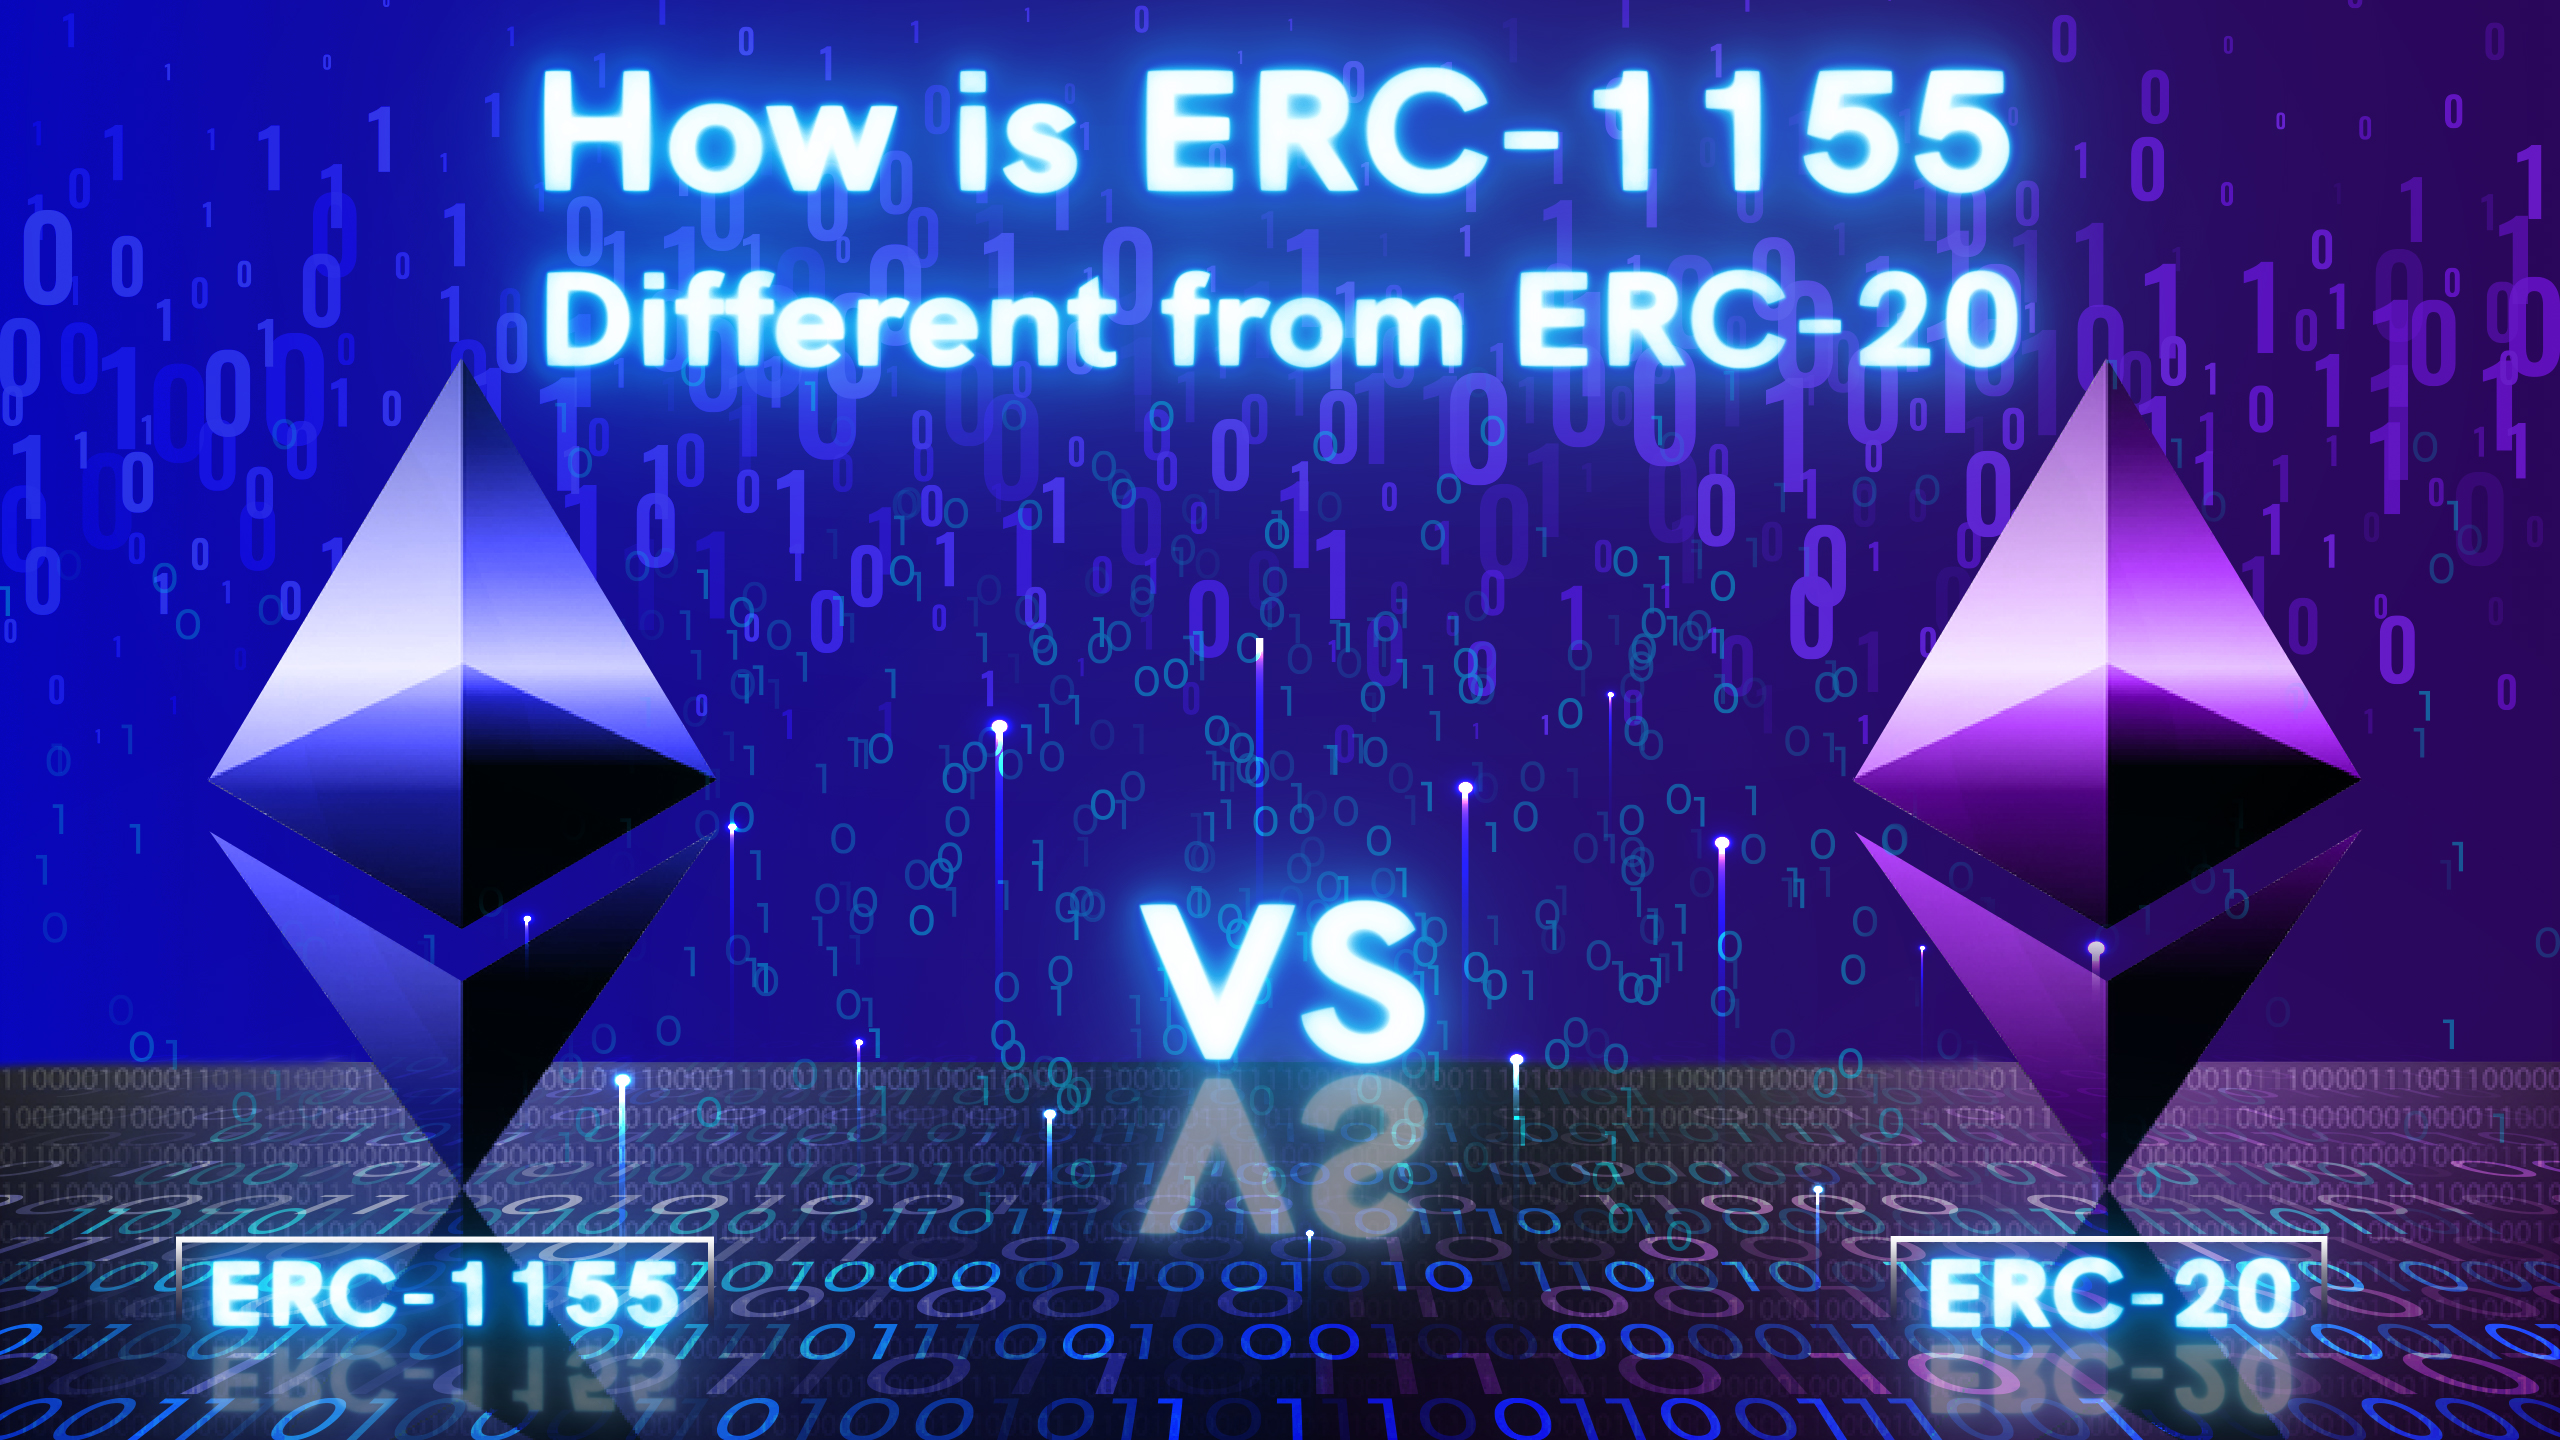 What is ERC-1155? - How to Get an ERC-1155 Wallet